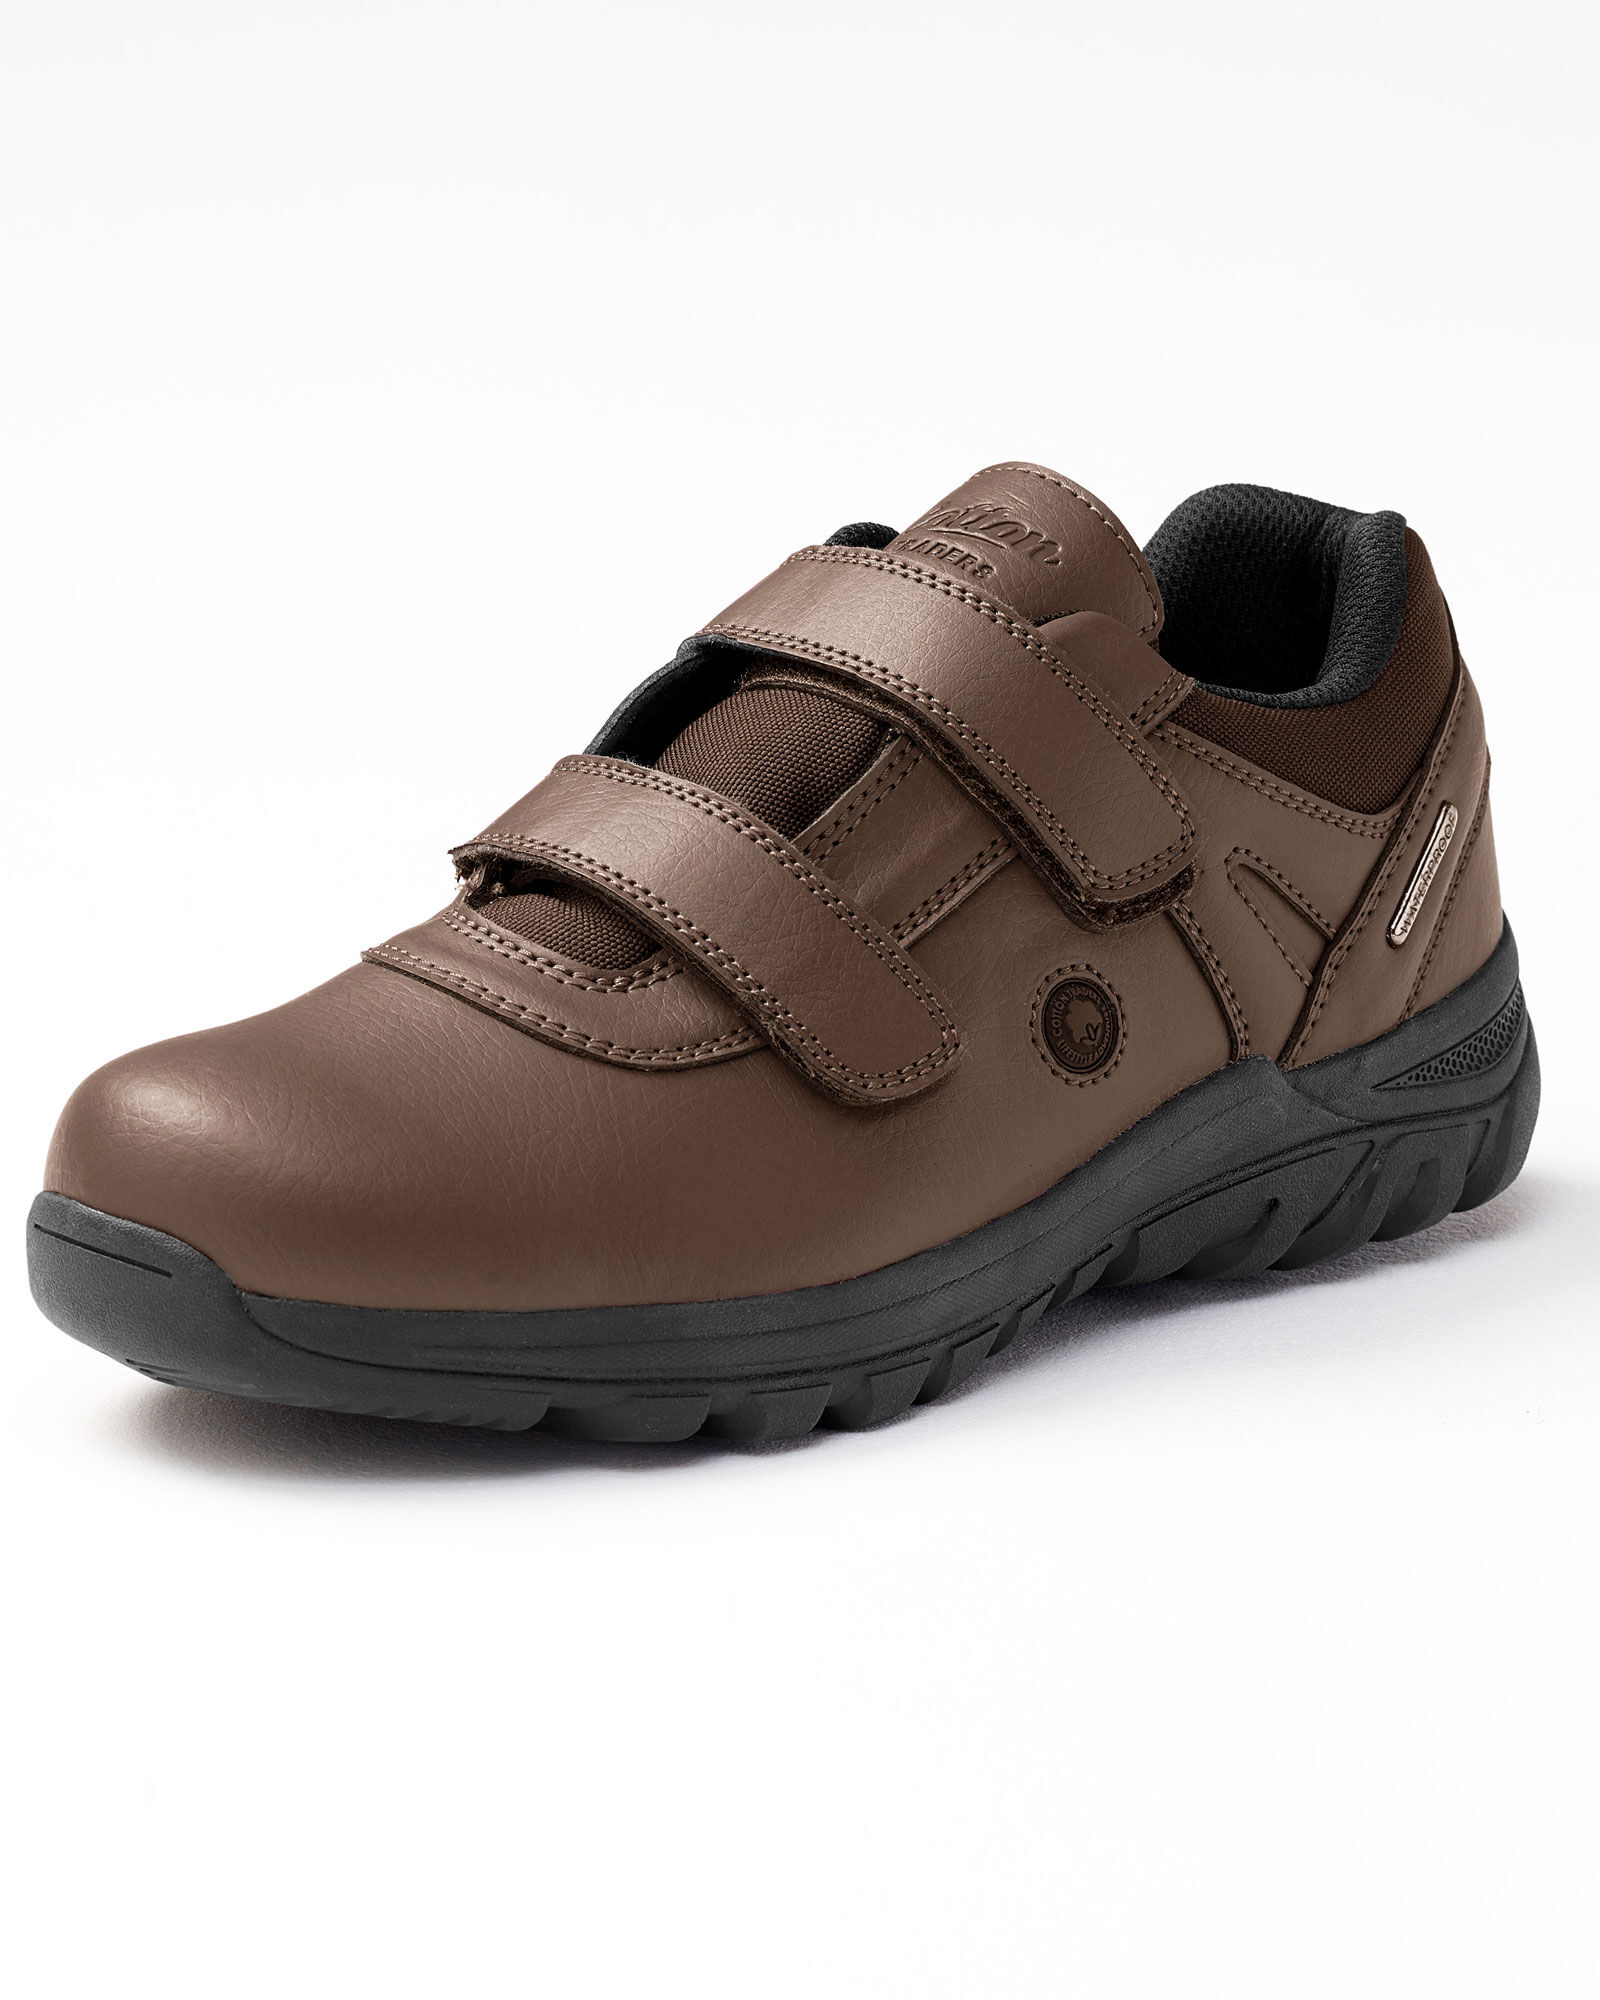 cotton traders waterproof shoes